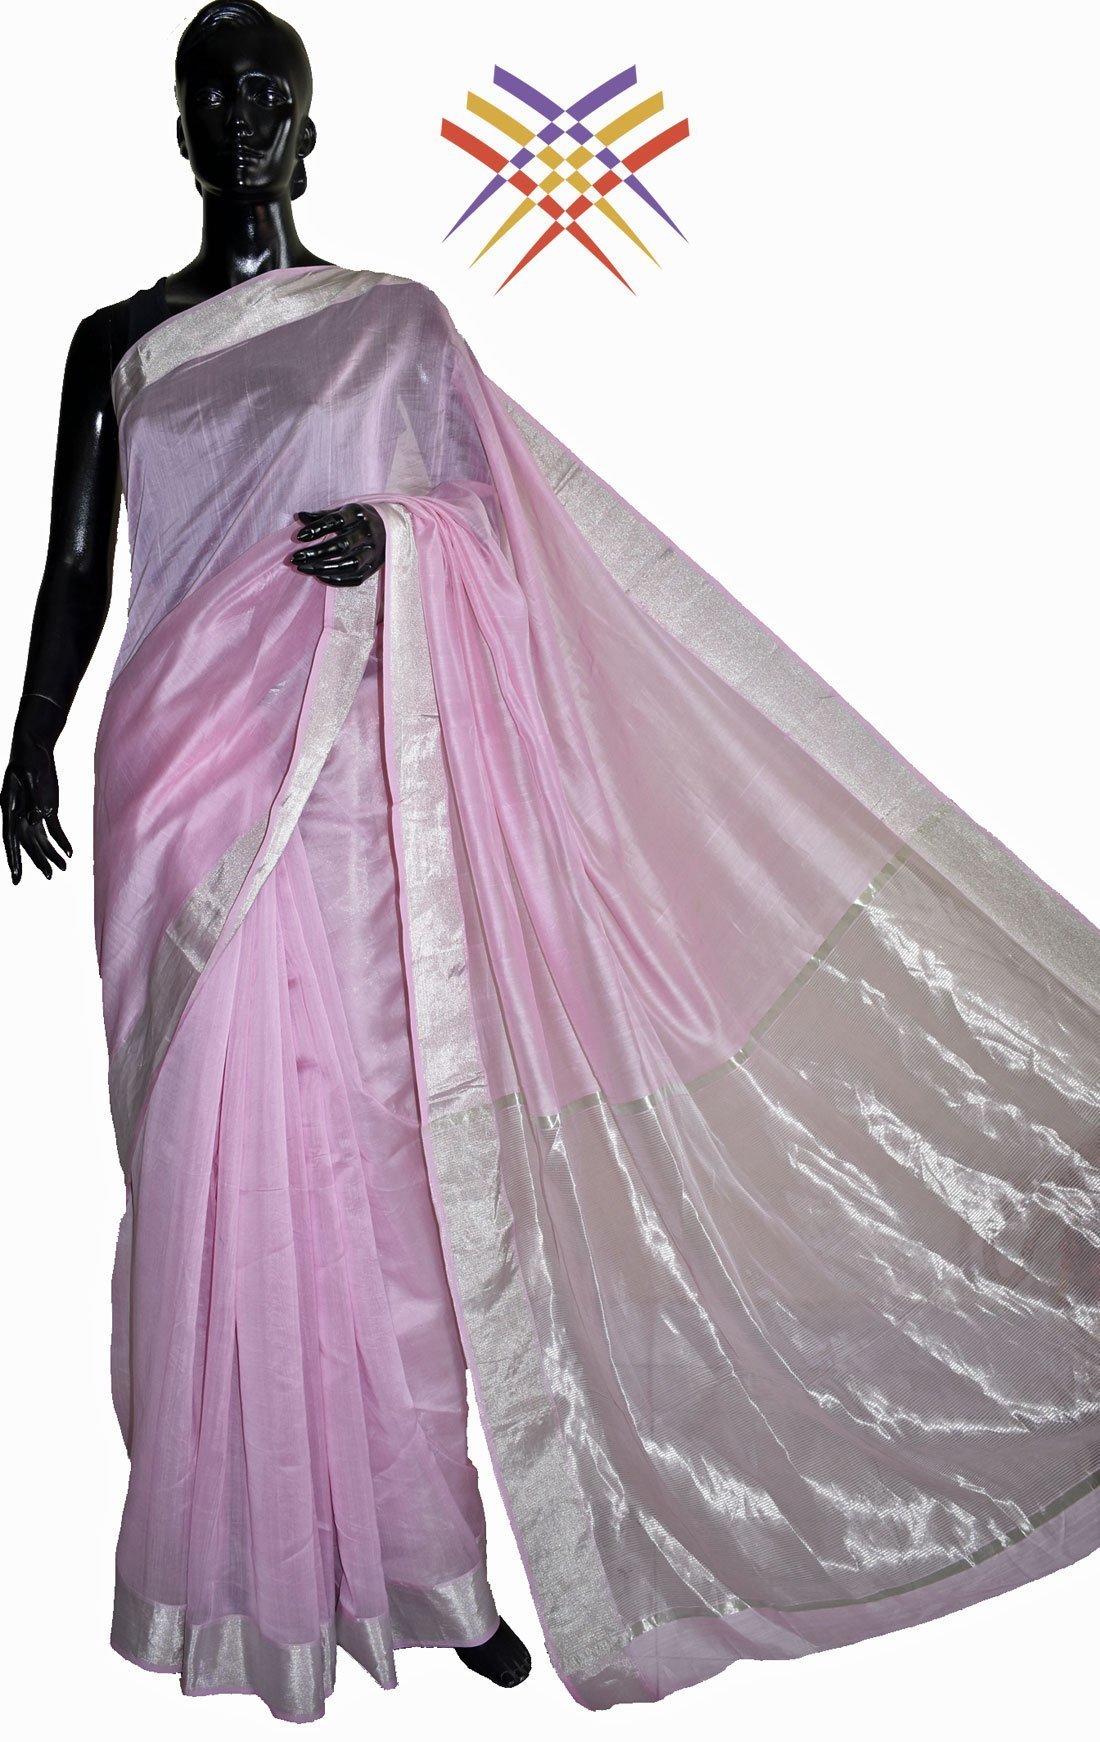 Black Mannequin in pink handloom saree with silver border